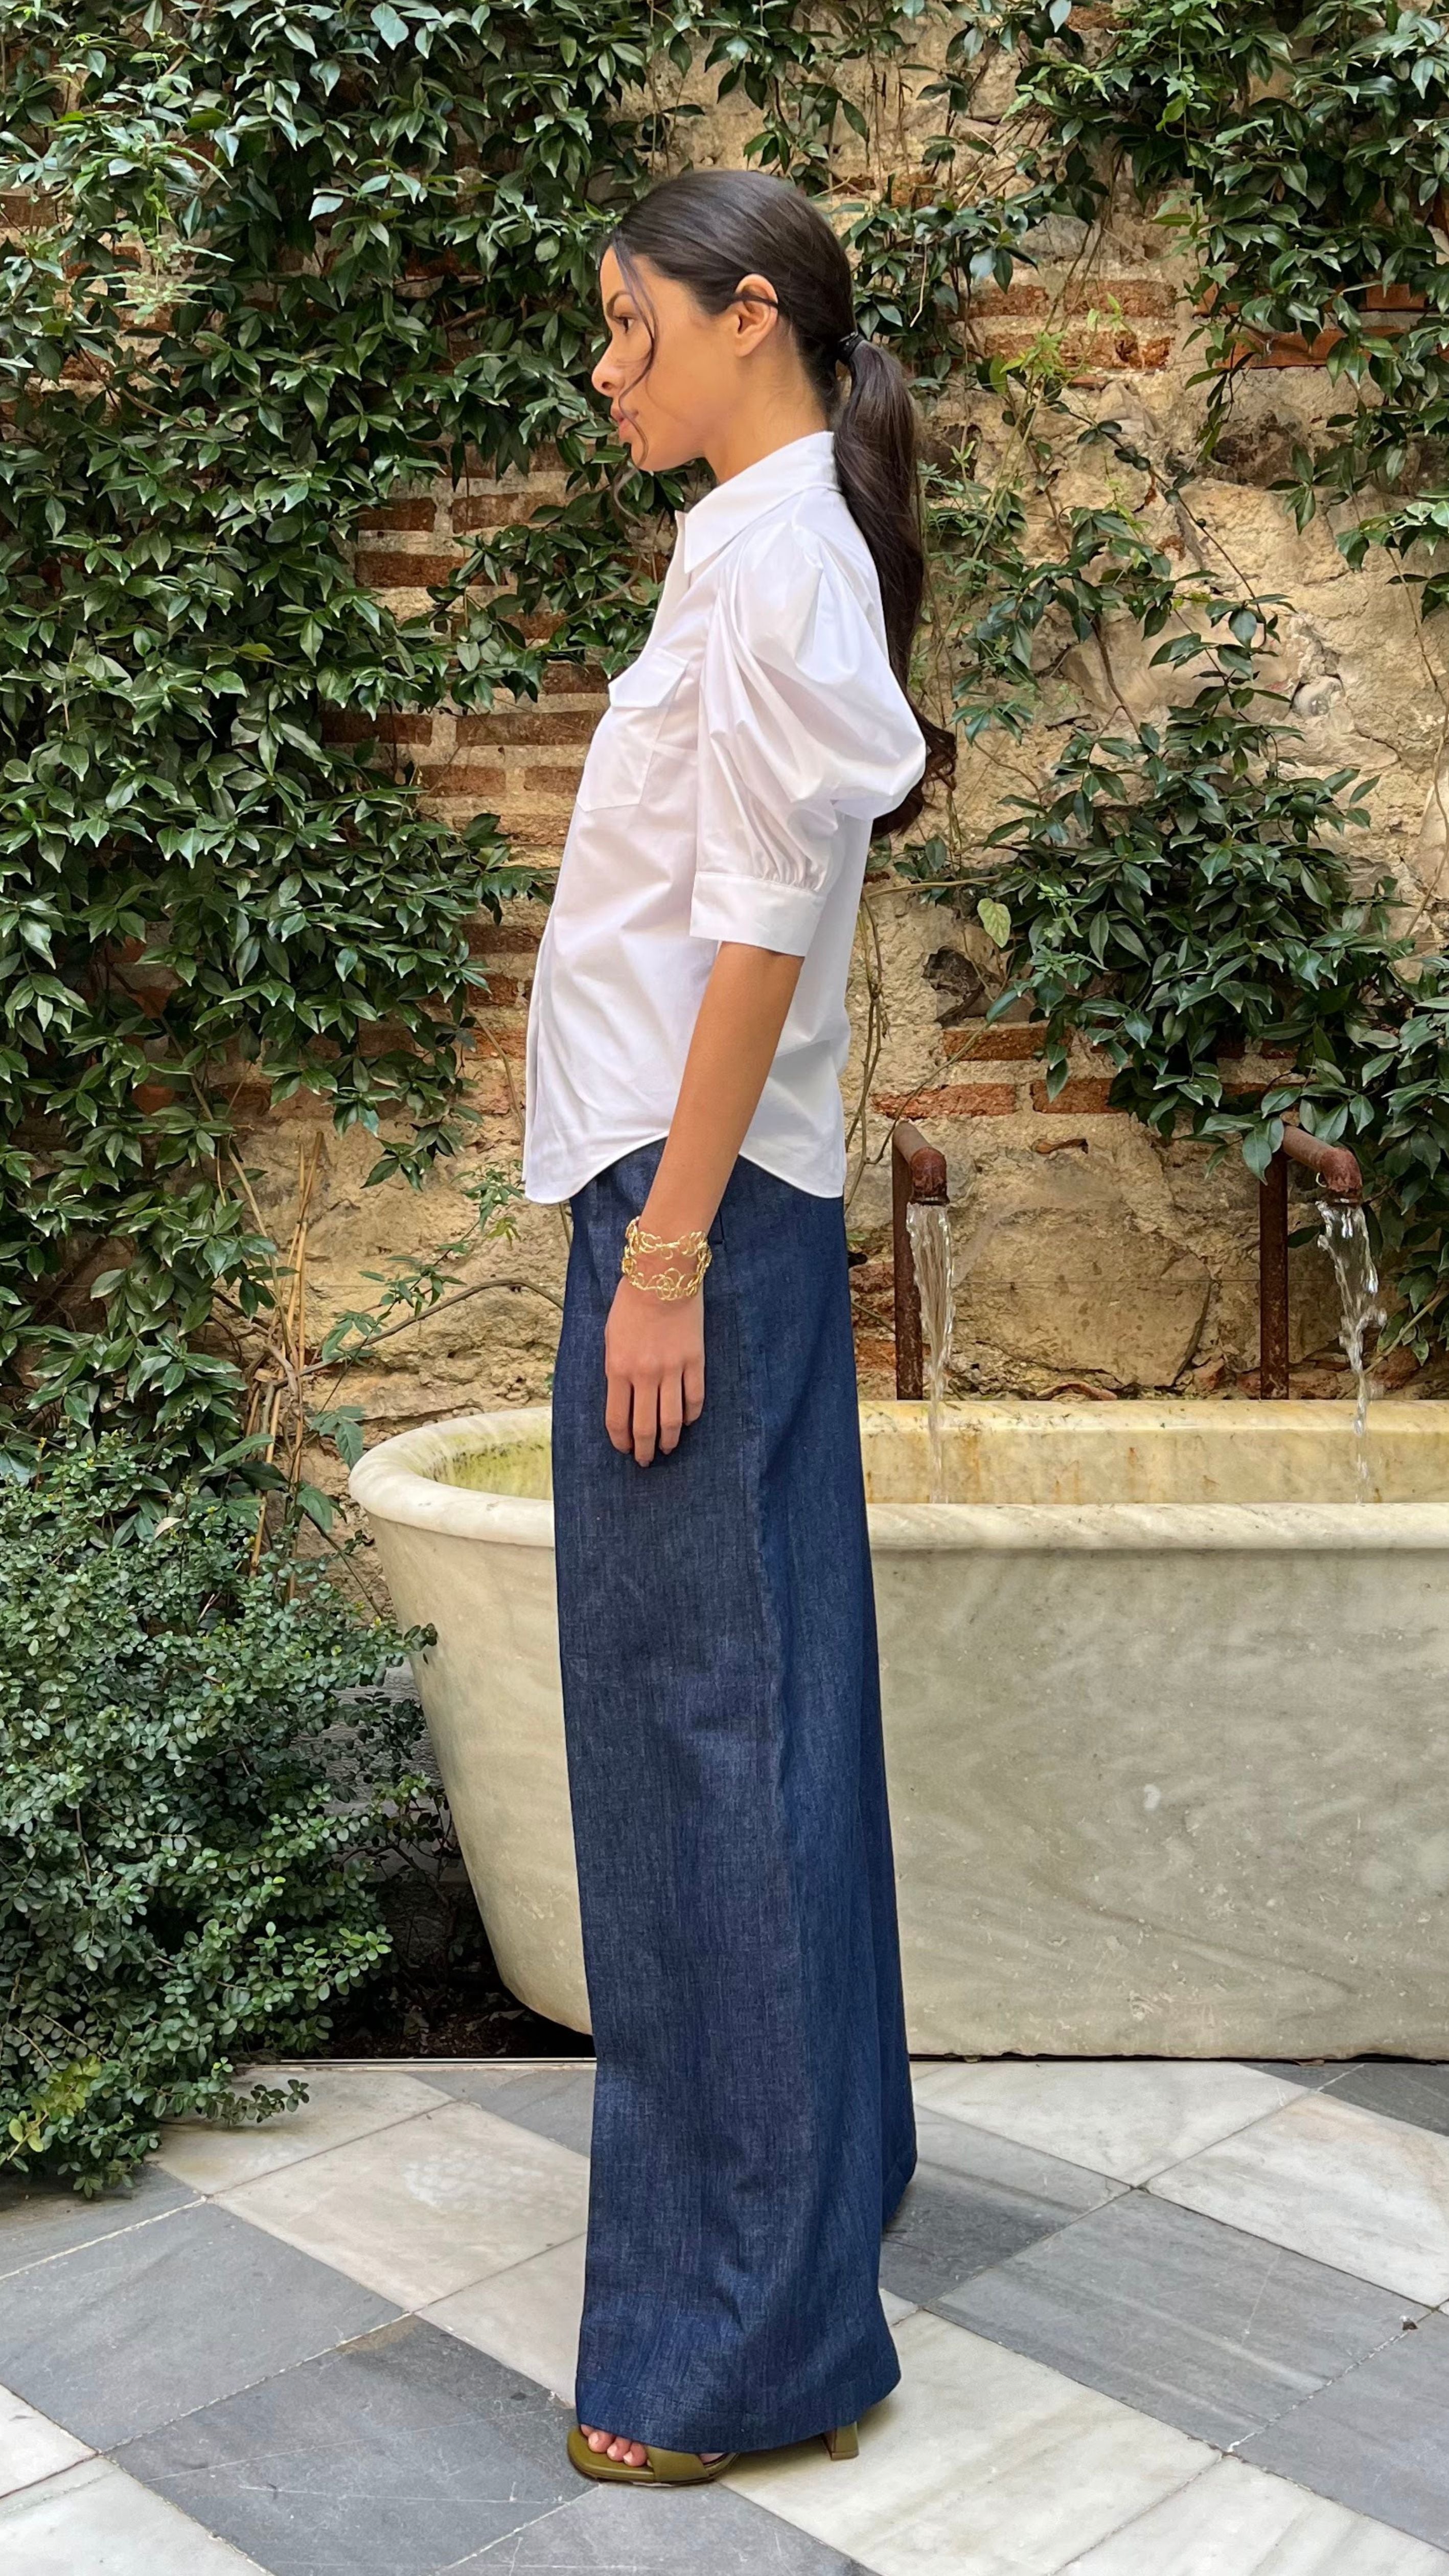 Rochas Paris Cotton Poplin Short Sleeved Shirt. A button up blouse in lightweight cotton it has two front pockets and puffed sleeves. Photo shown on model also wearing Rochas wide leg denim trousers from a side view.